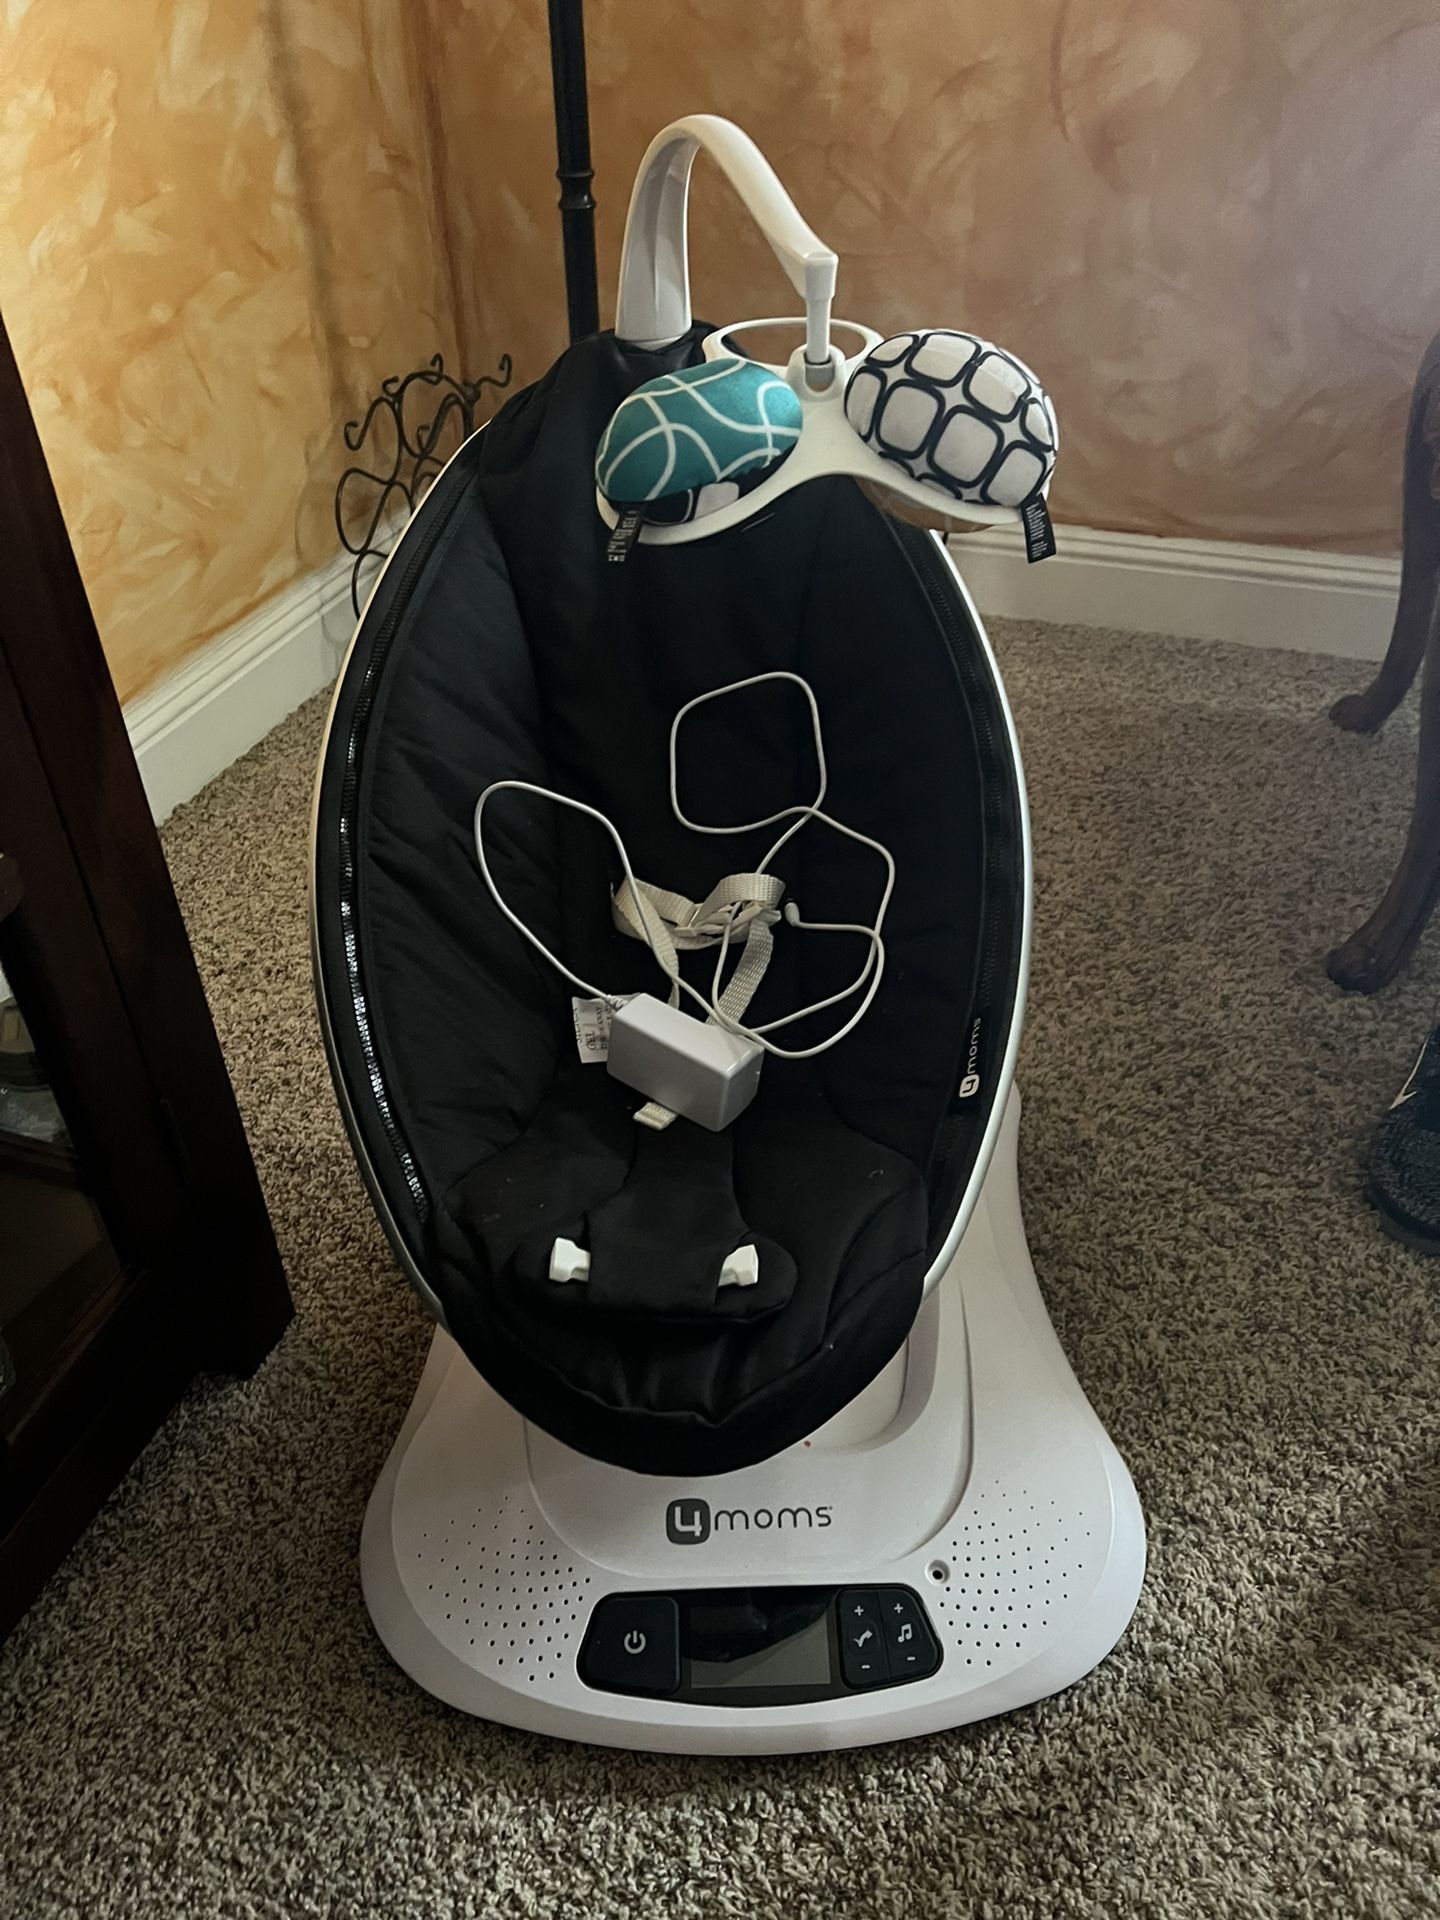 4moms mamaRoo Unique Motions Bluetooth Multi-Motion Baby Swing 